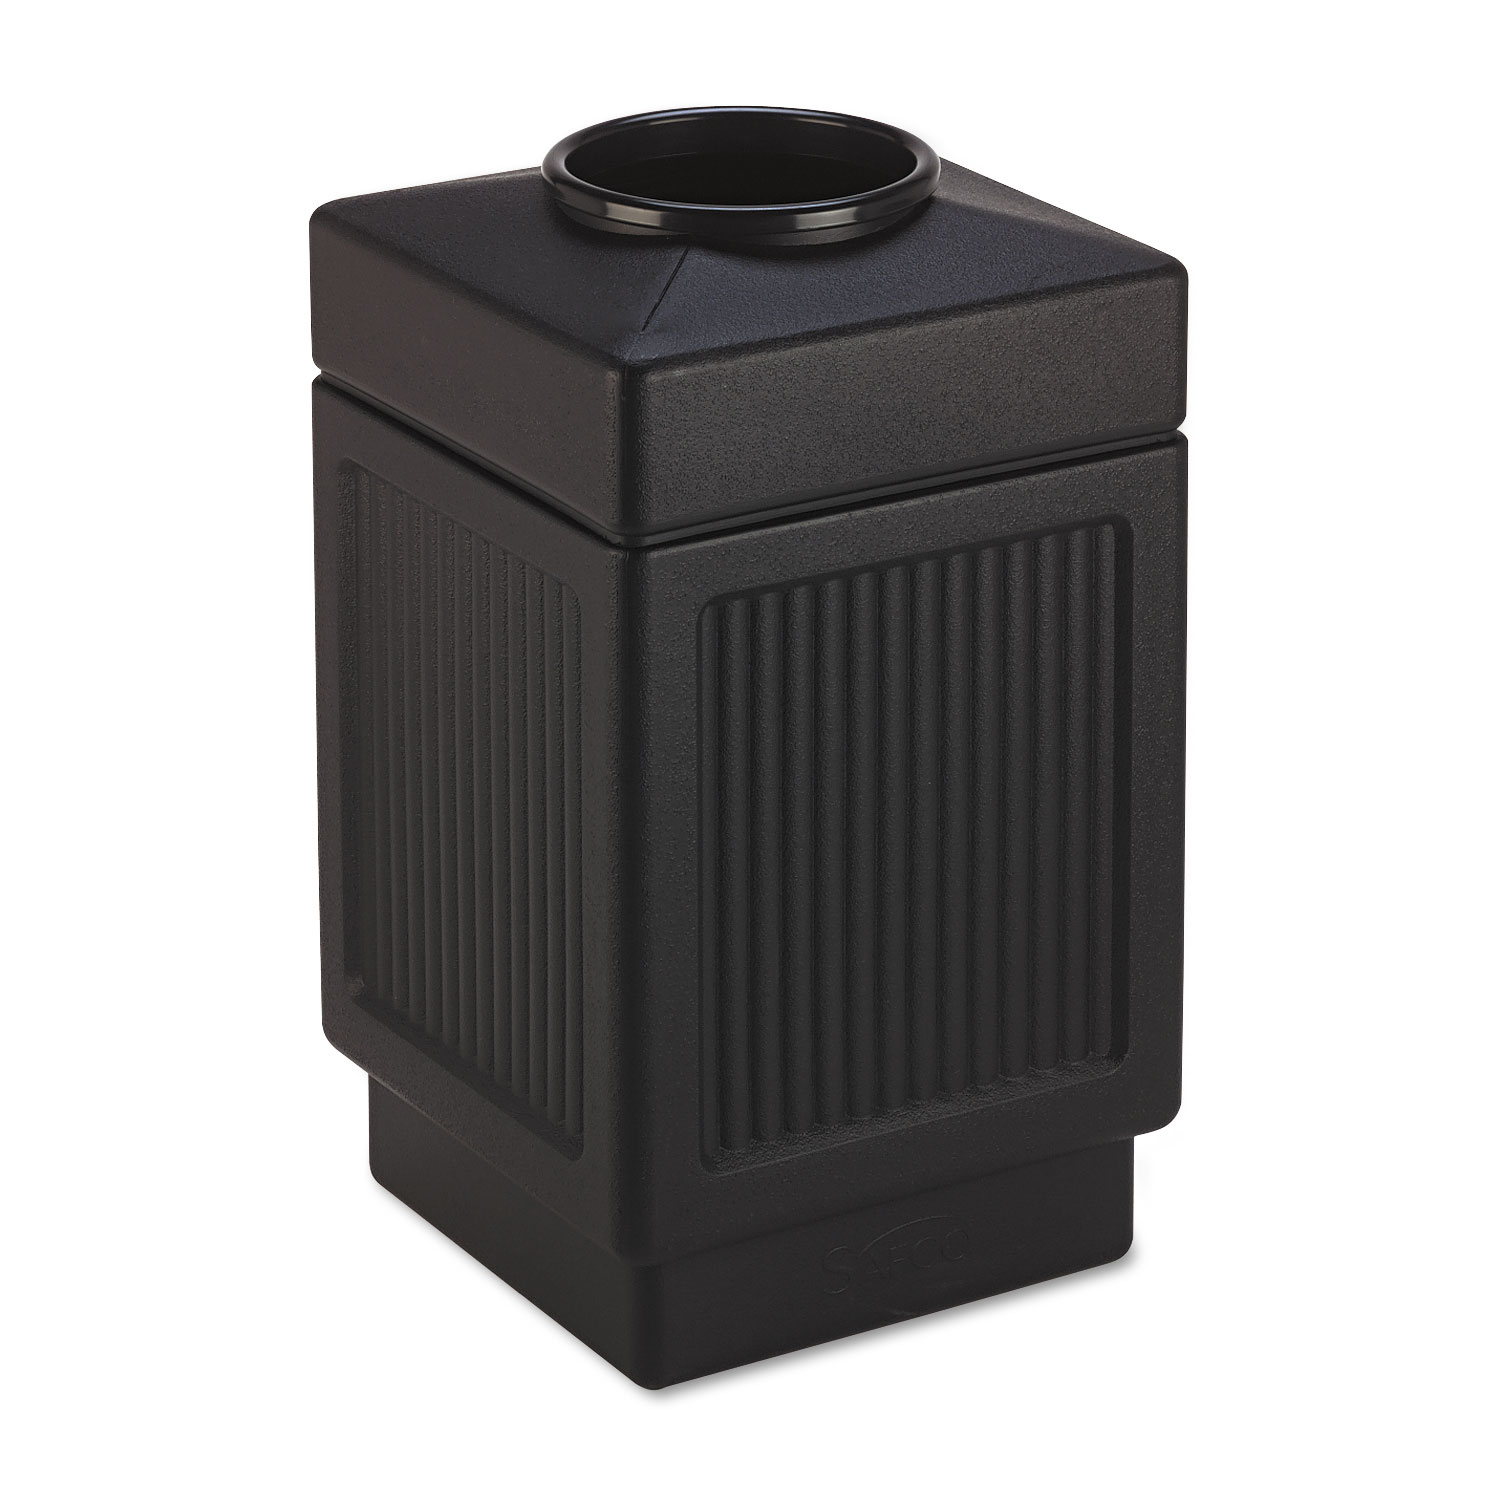 Safco 9475bl Canmeleon Collection 38 Gallon Top Open Receptacle in Black for sale online 